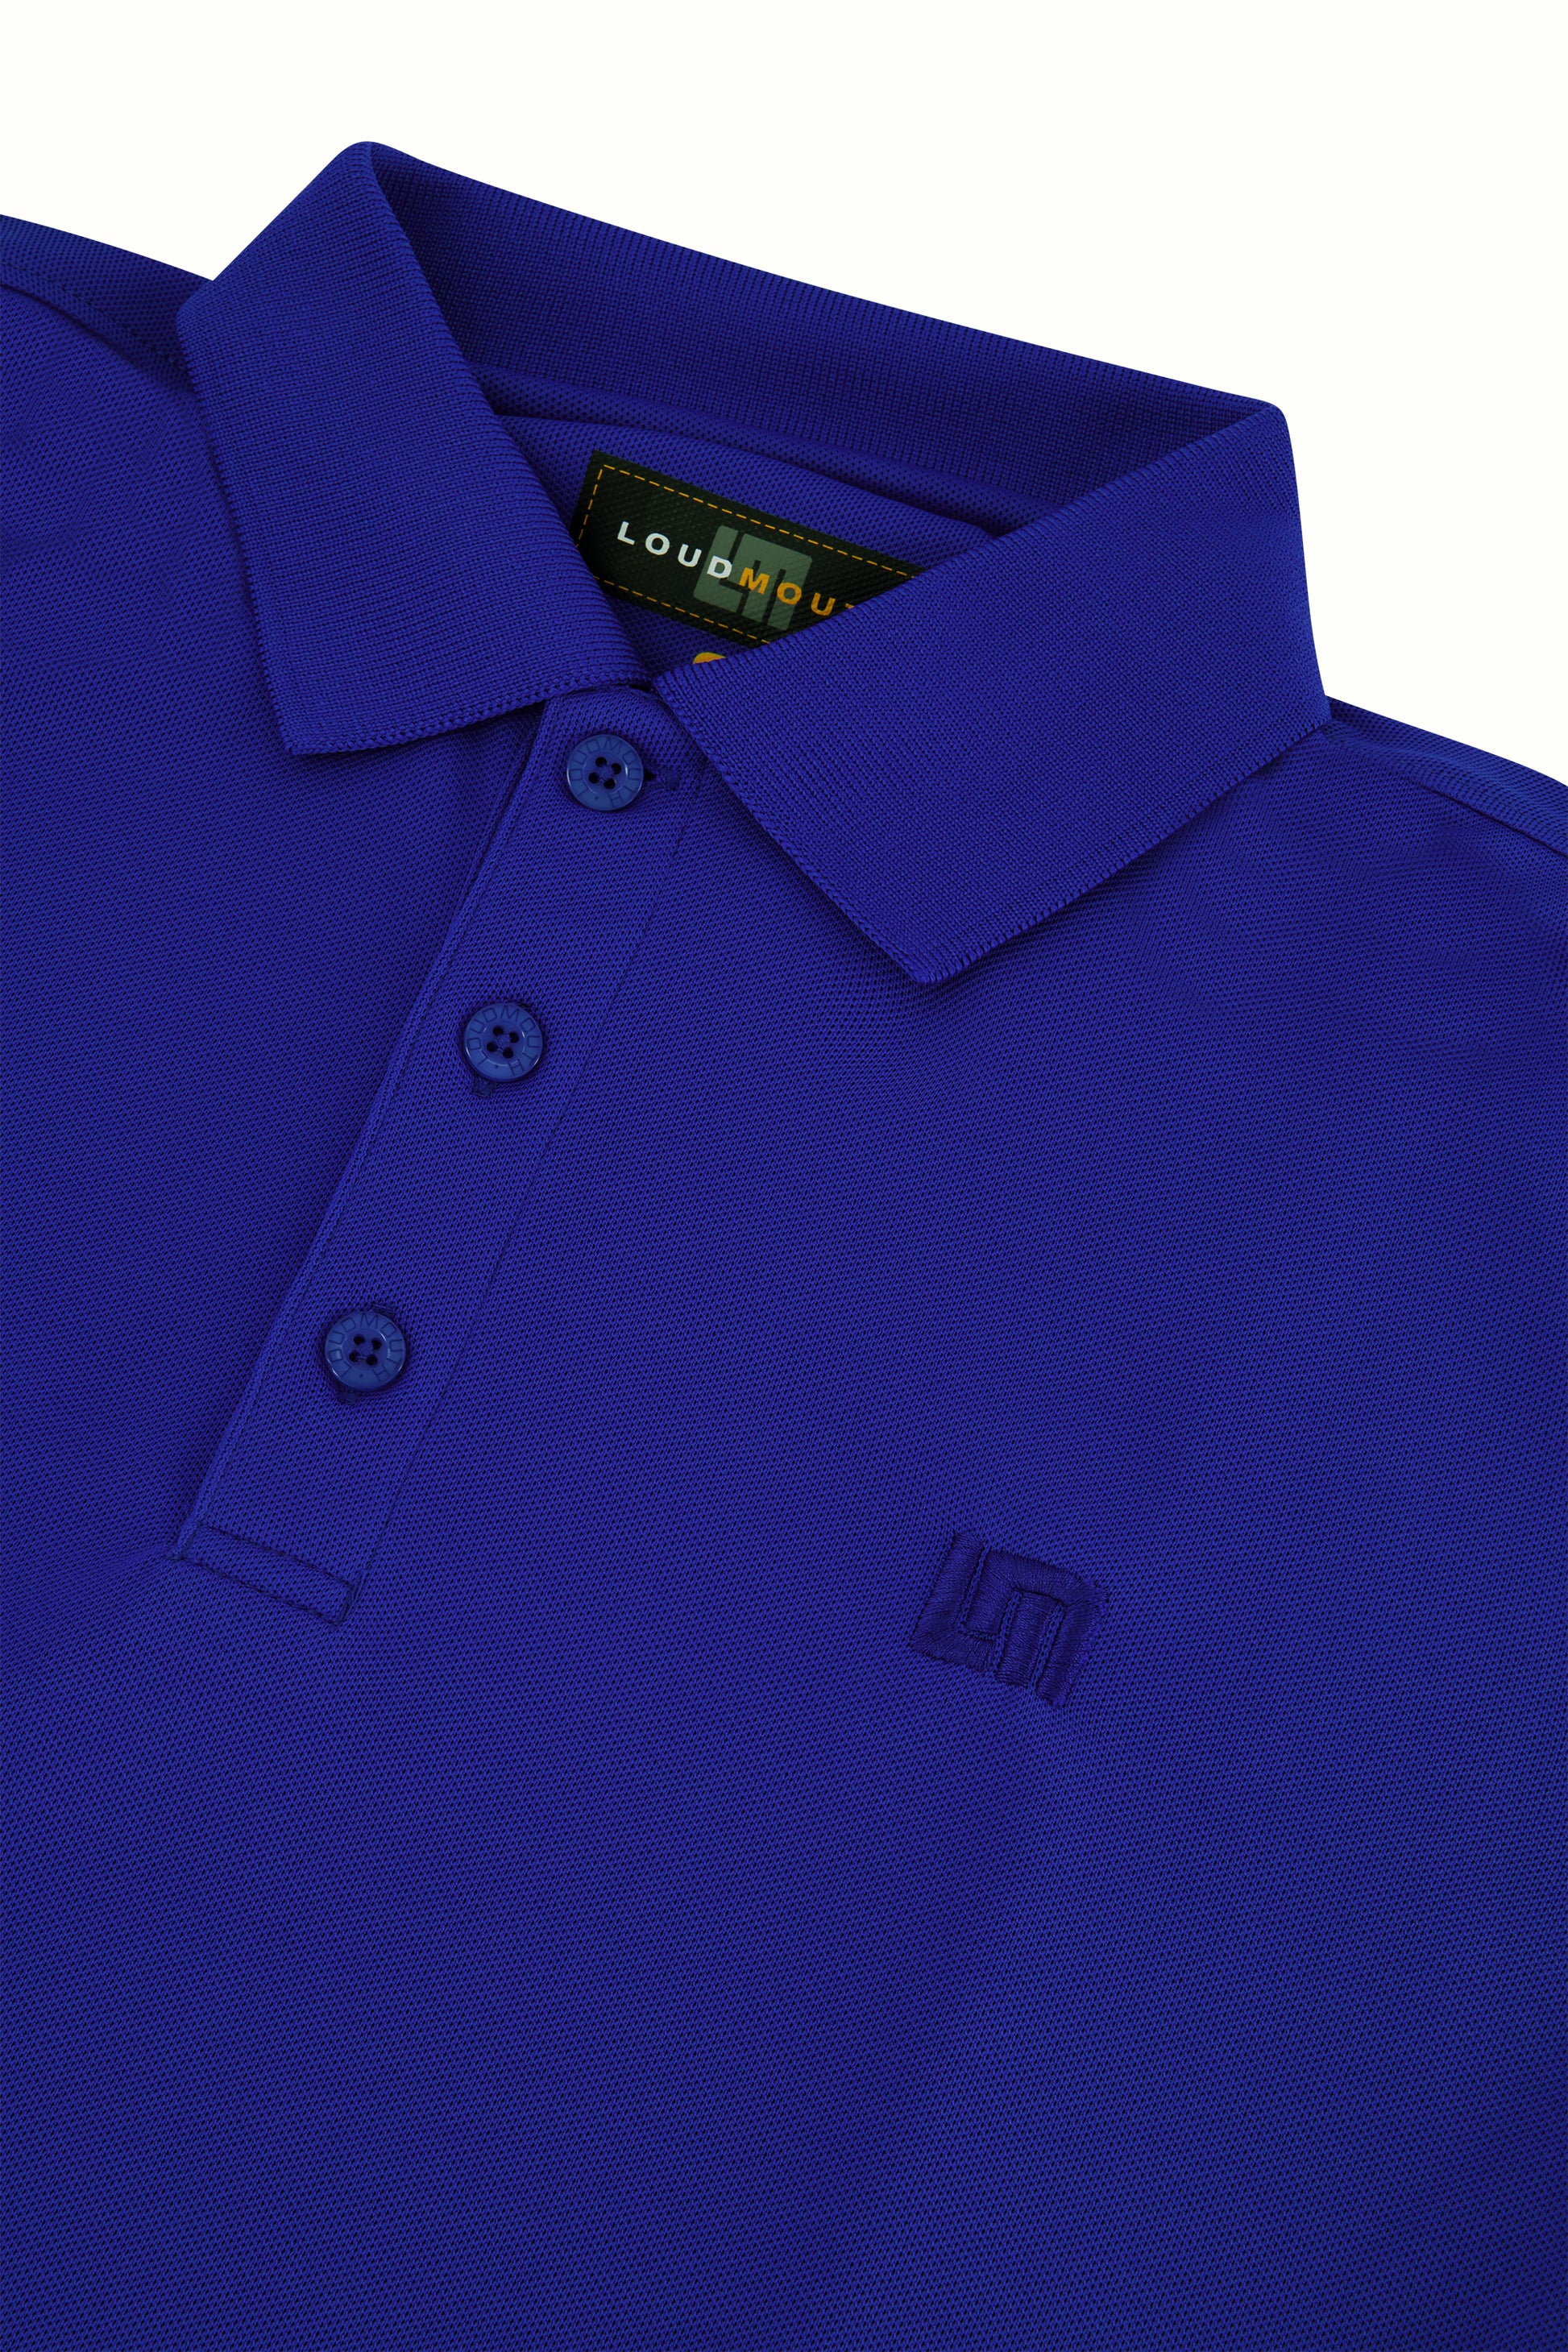 Men's Heritage Polo - Dazzling Blue – Loudmouth